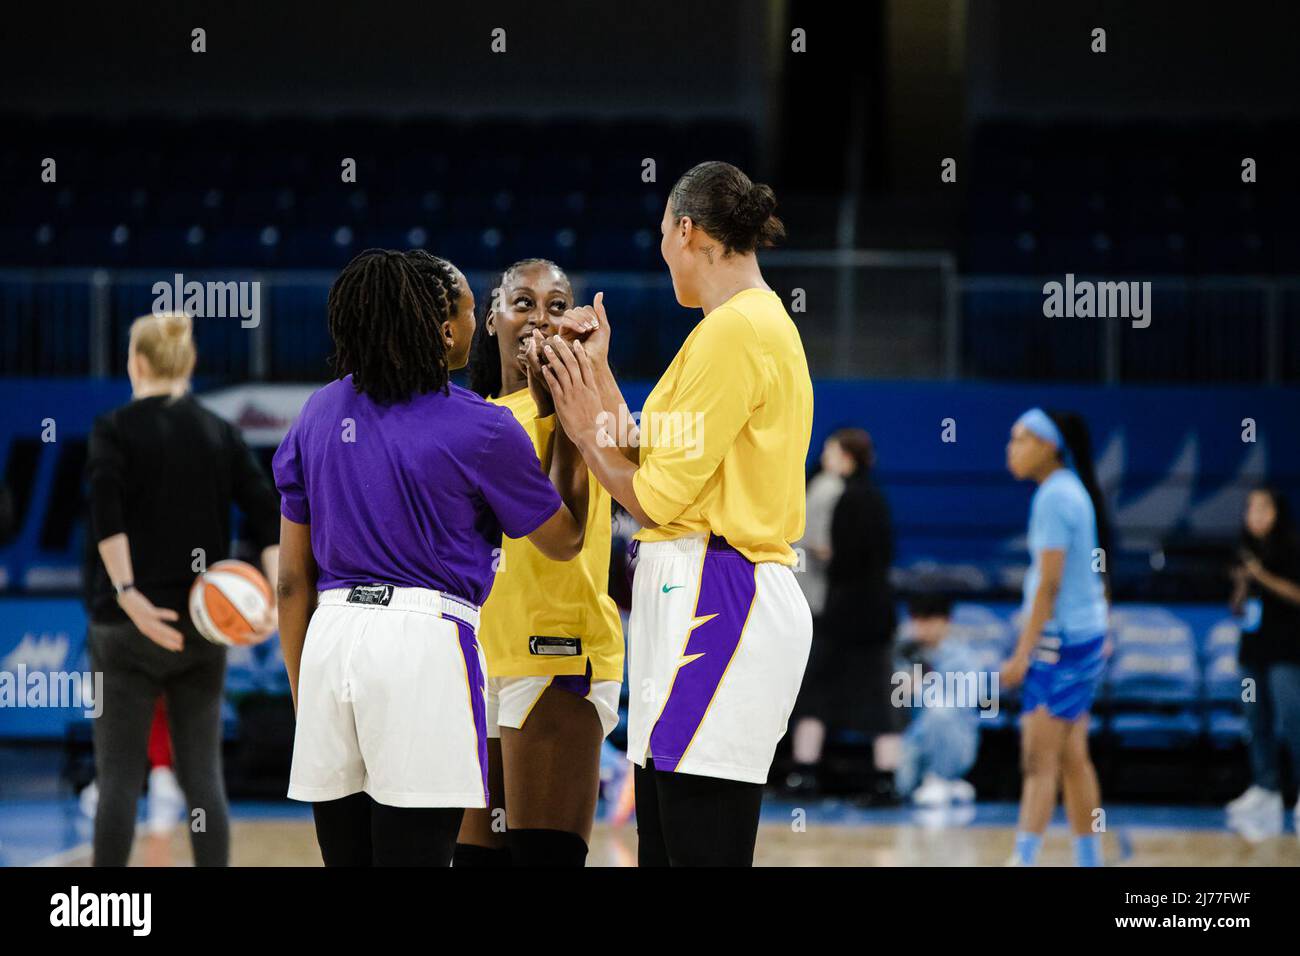 Nneka Ogwumike (30 Los Angeles Sparks), Chiney Ogwumike (13 Los Angeles Sparks) and Liz Cambage (1 Los Angeles Sparks) huddle during warm ups before the WNBA basketball game between the Chicago Sky and Los Angeles Sparks on Friday May 6th, 2022 at Wintrust Arena, Chicago, USA. (NO COMMERCIAL USAGE)  Shaina Benhiyoun/SPP Stock Photo